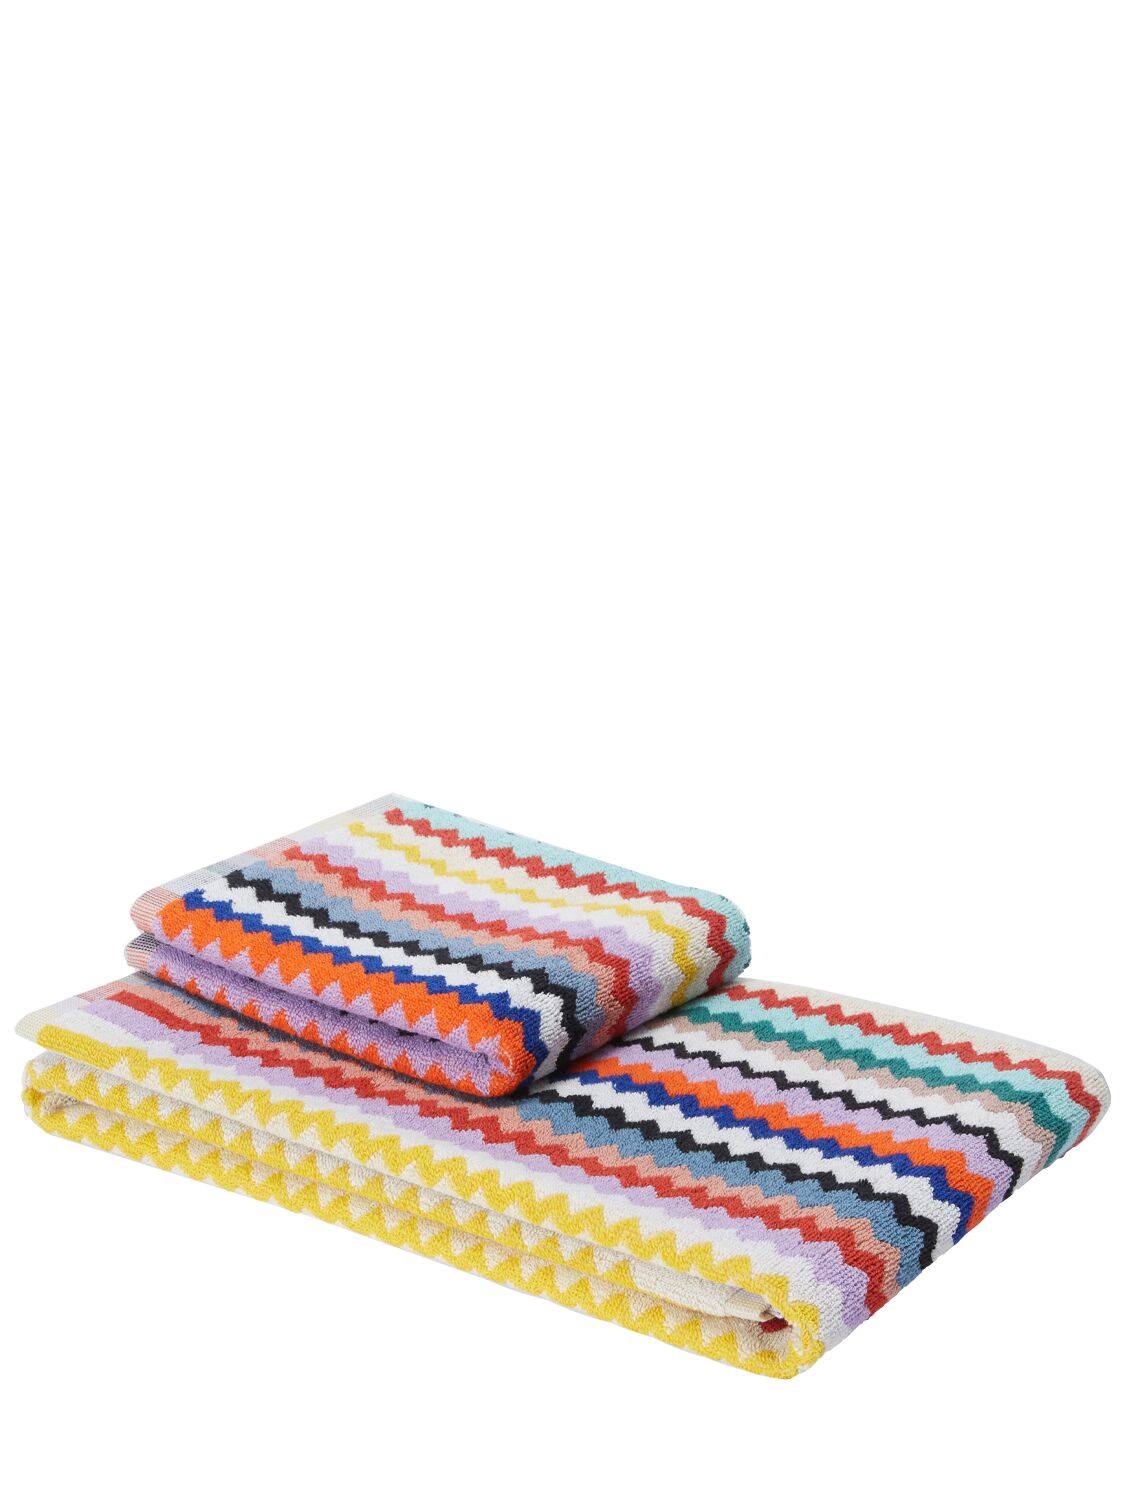 Missoni Home Collection Riverbero Set Of 2 Towels In Multicolor